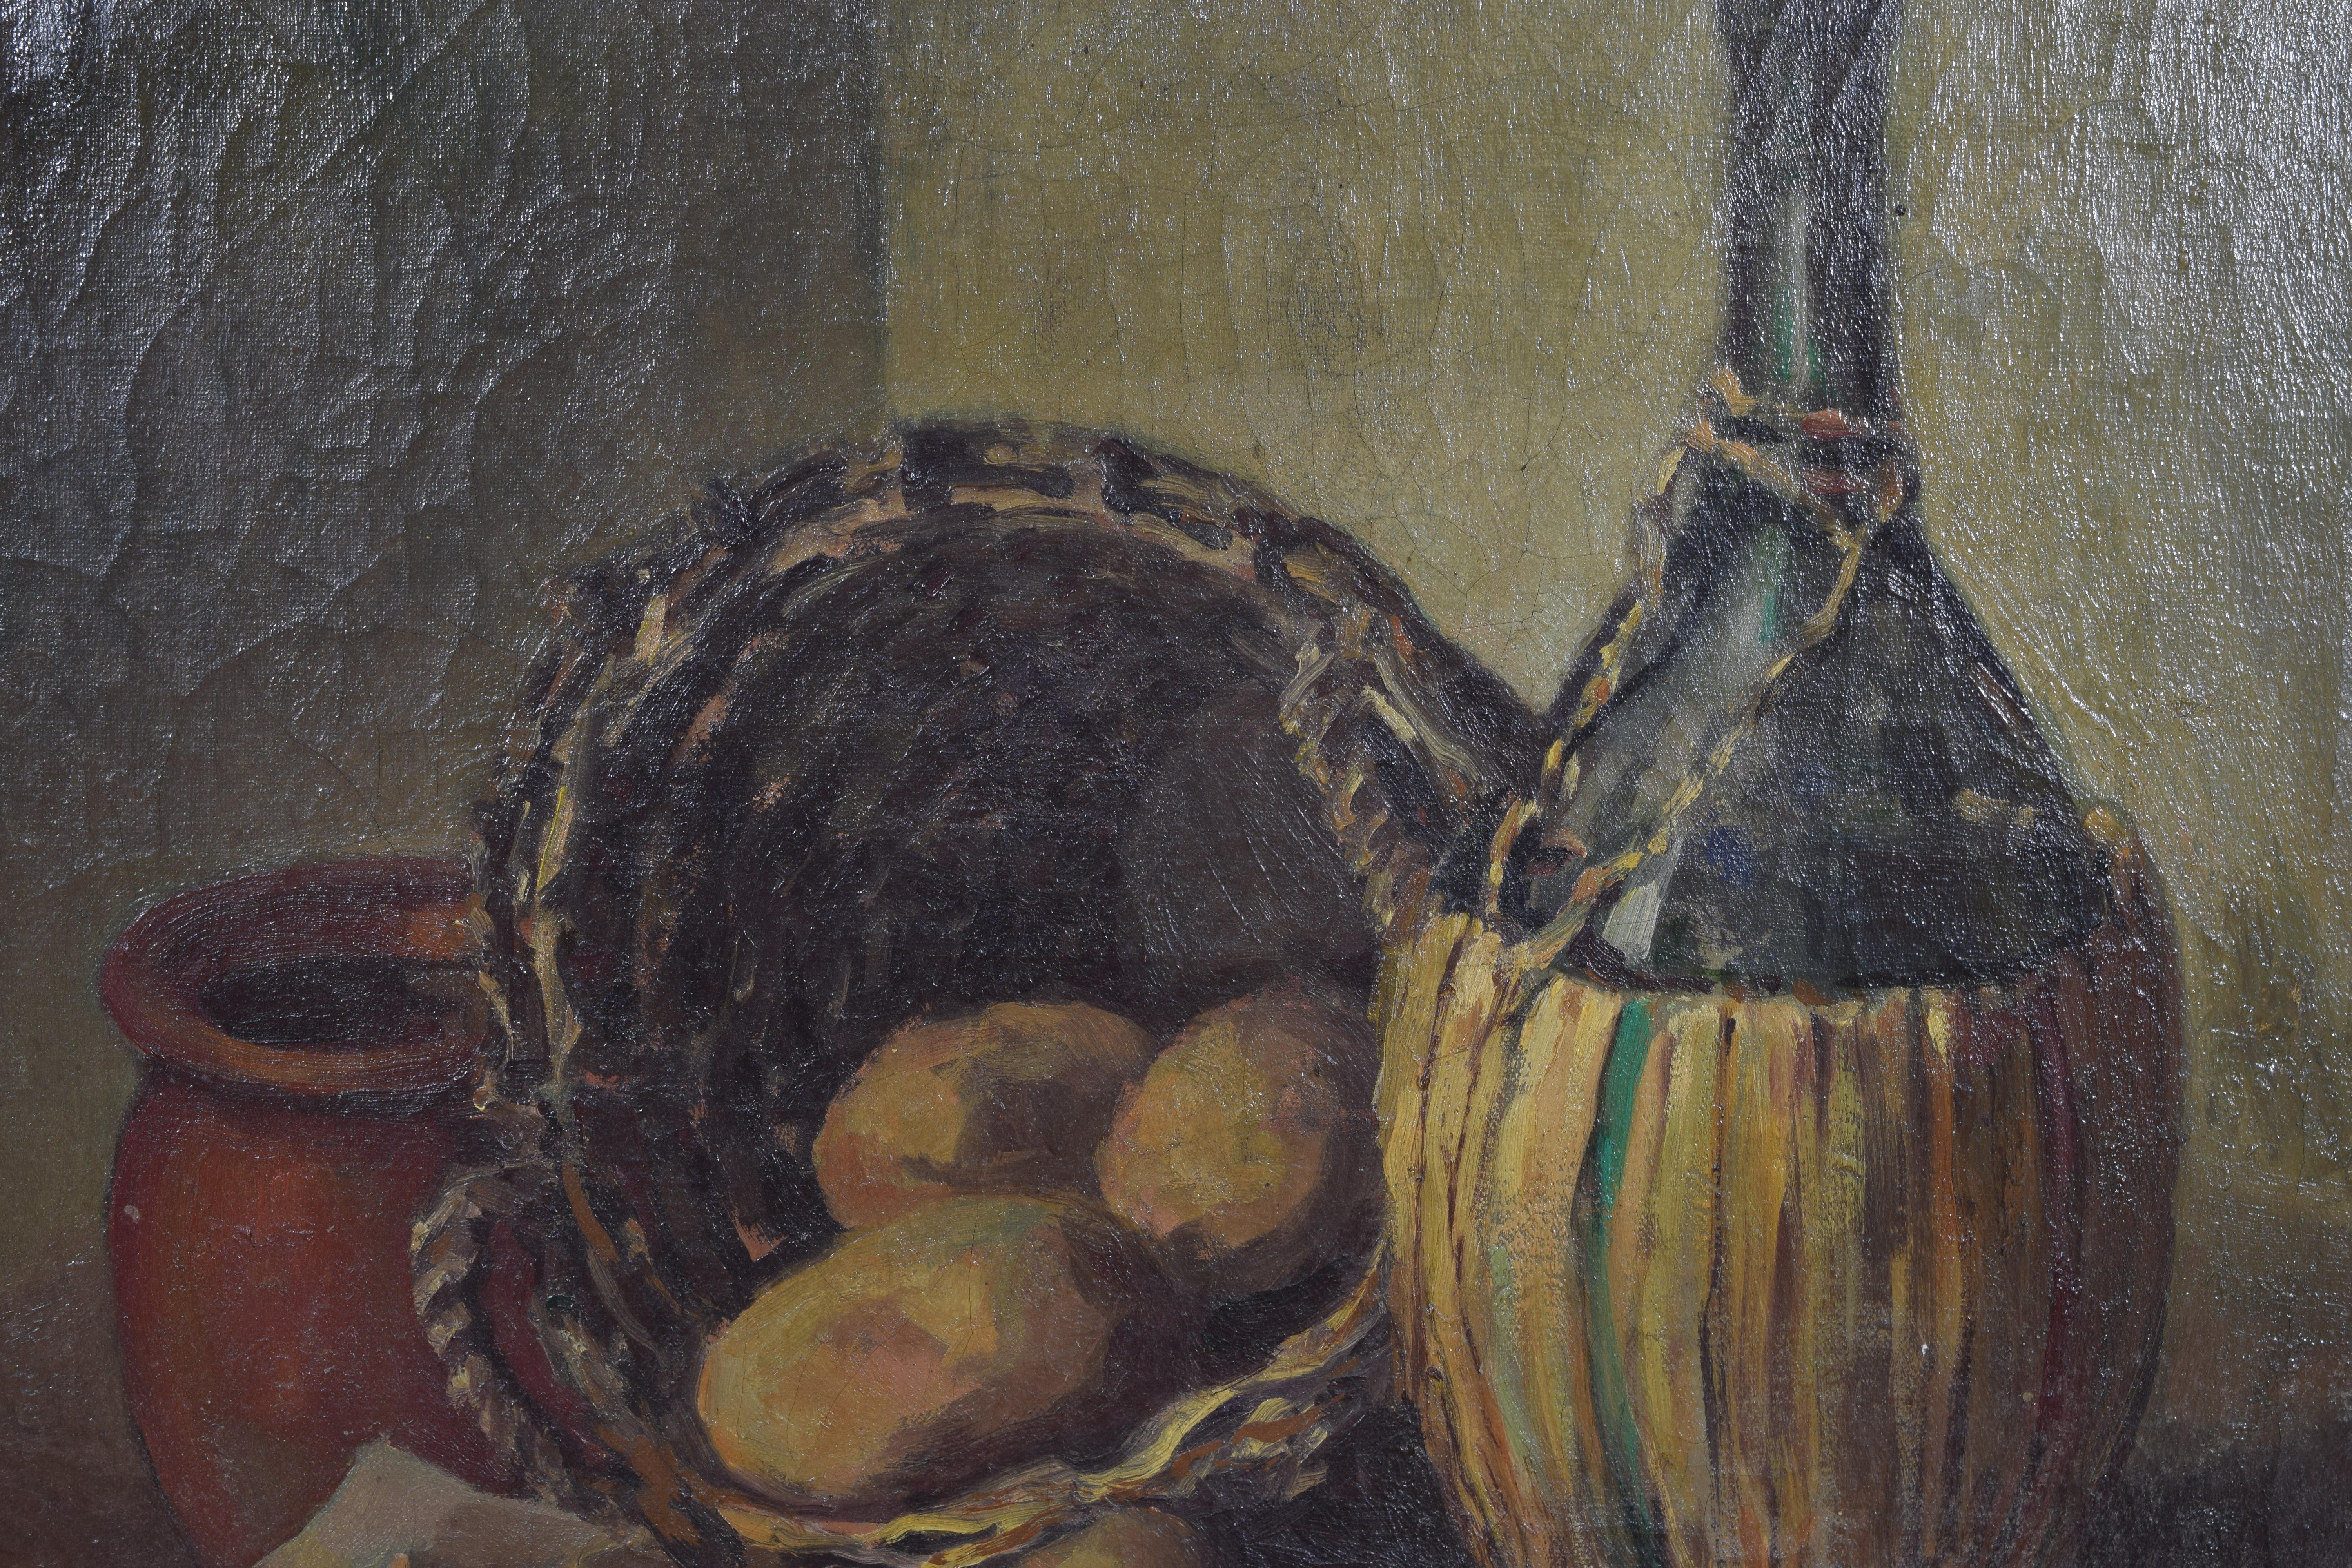 European Oil on Canvas, Still Life with Wine Bottle, Signed Islendaal, circa 1965